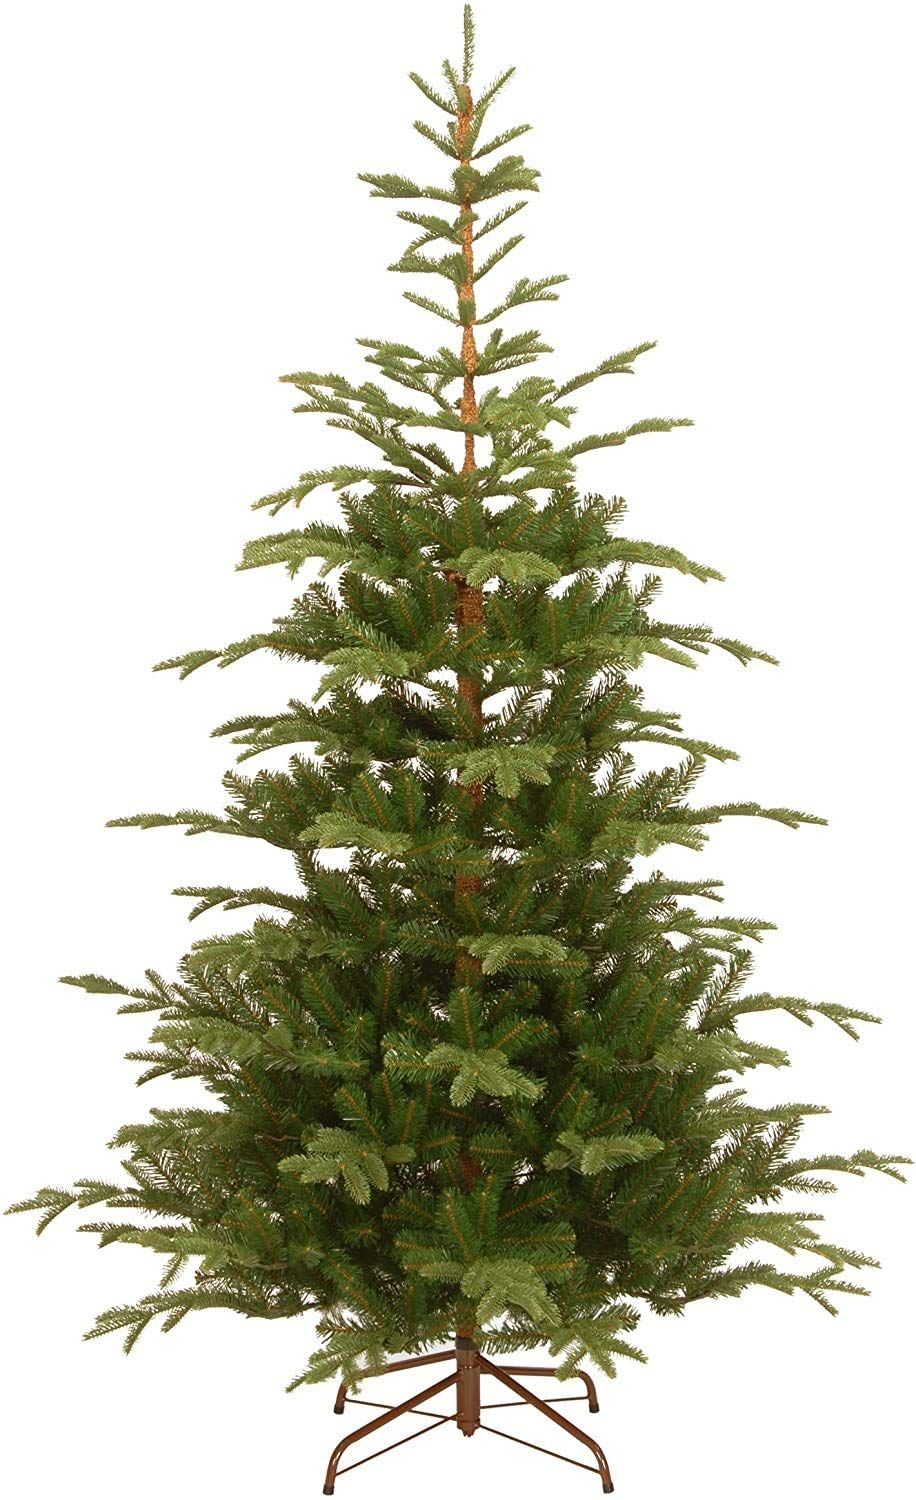 National Tree Company 'Feel Real' Artificial Christmas Norwegian Spruce Tree-7.5 ft | Amazon (US)